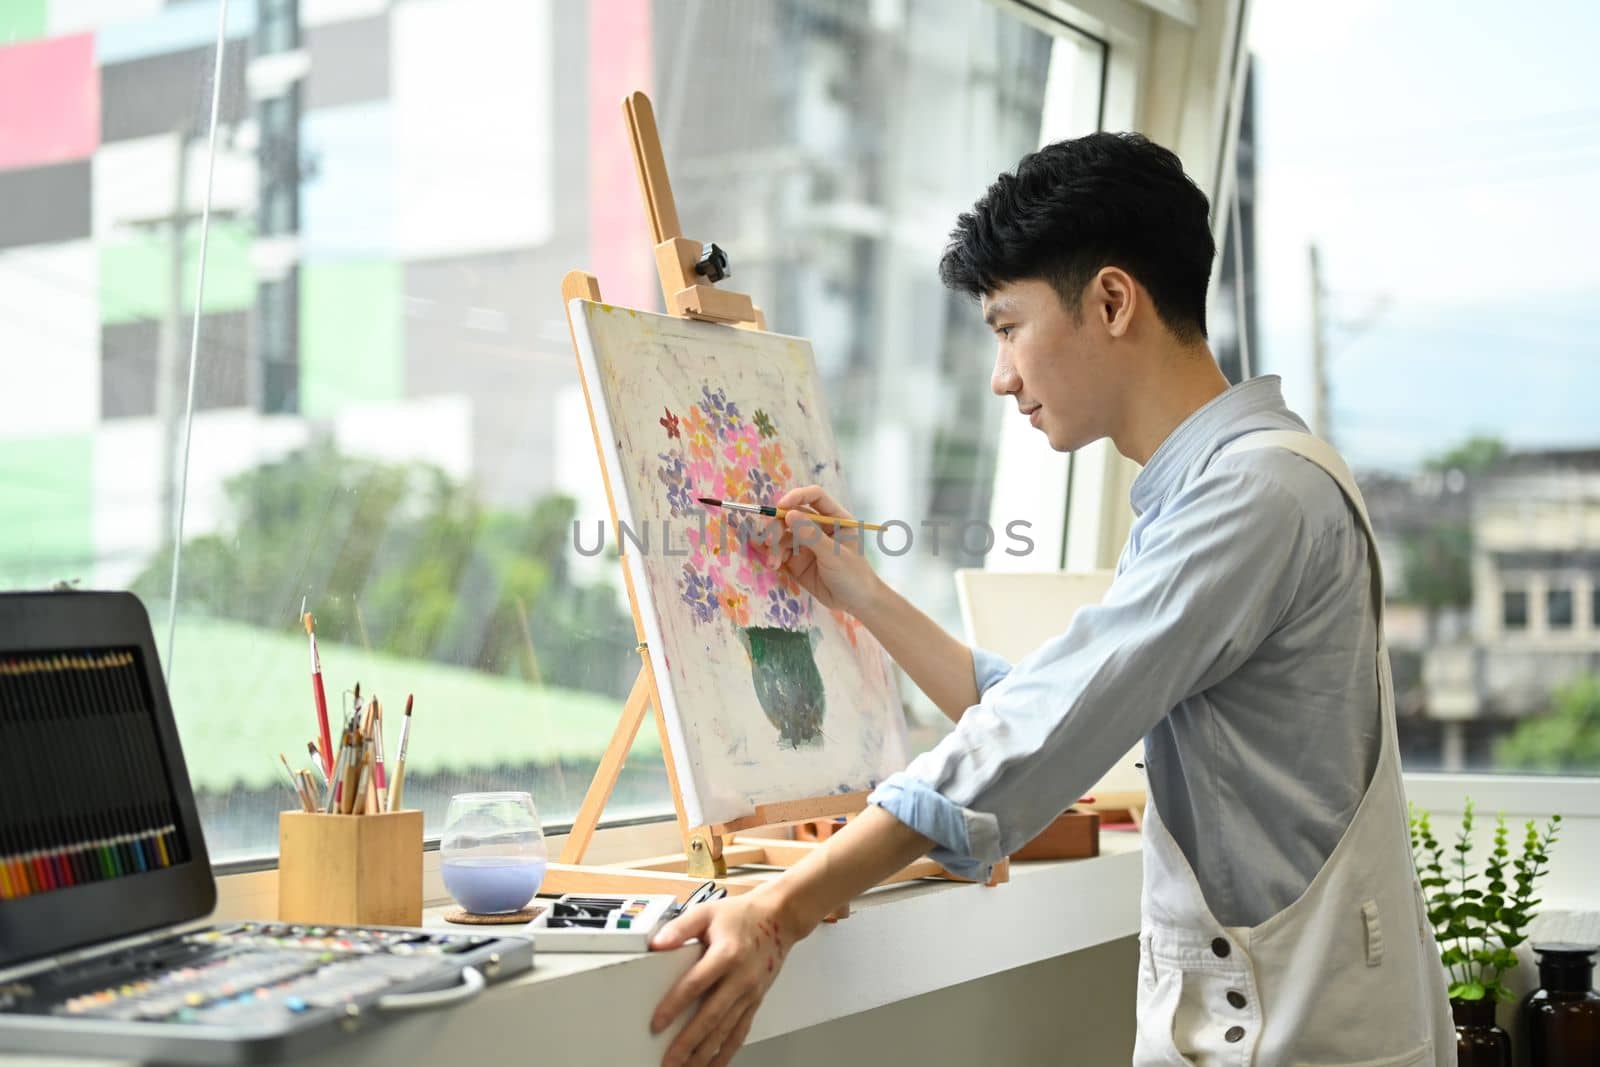 Concentrated man painting picture on canvas near window at art workshop. Leisure activity, creative hobby and art concept by prathanchorruangsak